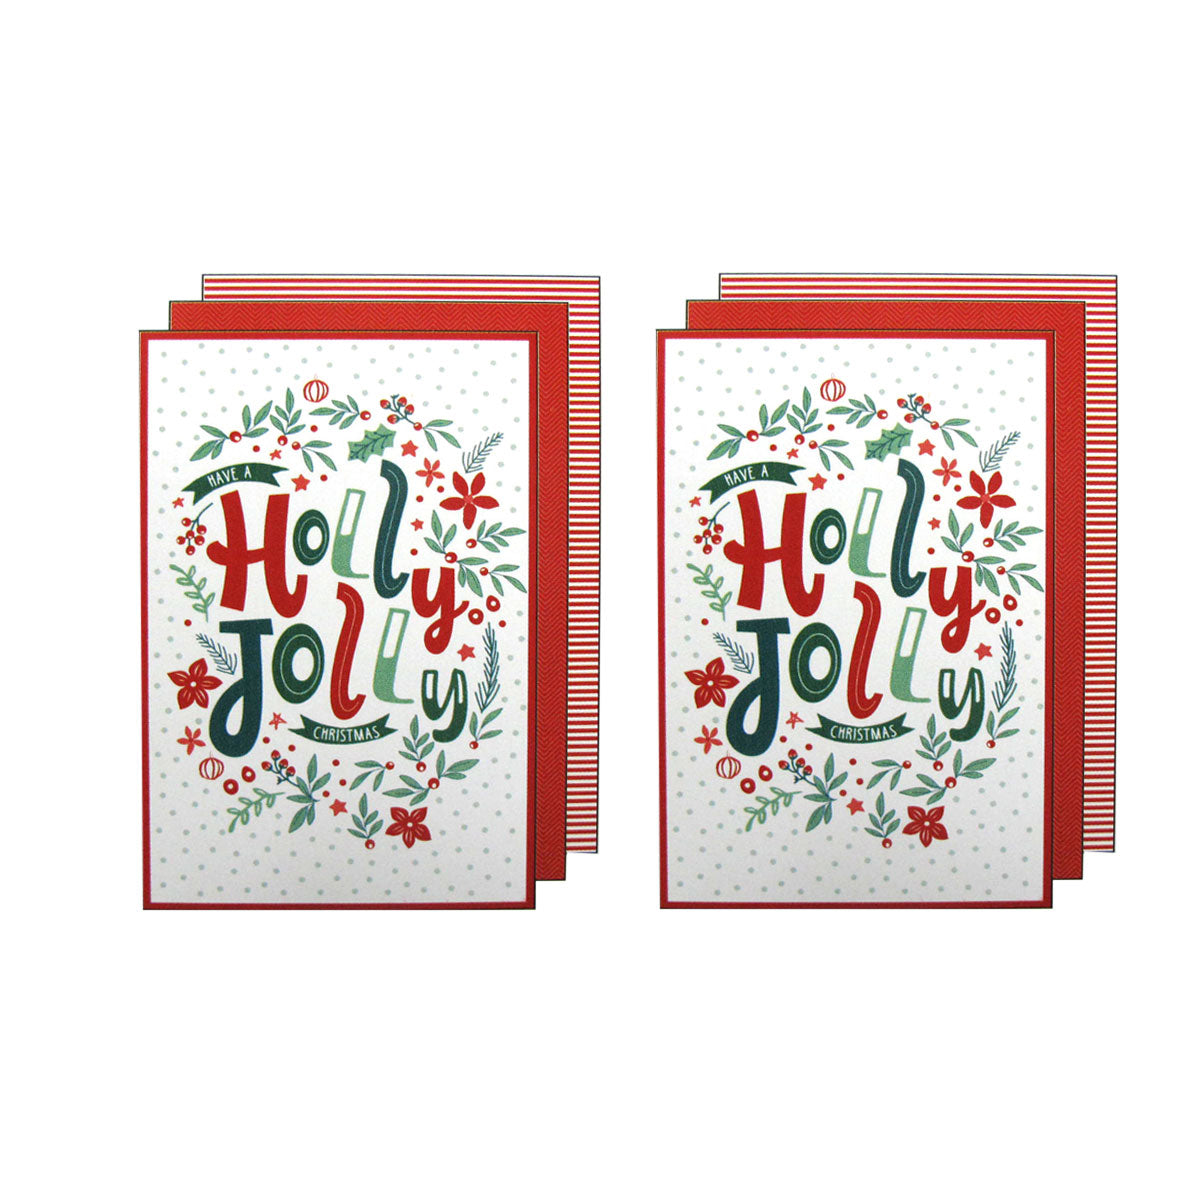 Ladelle Joyful Jolly Christmas Set Of 6 Cotton Kitchen Towels Red